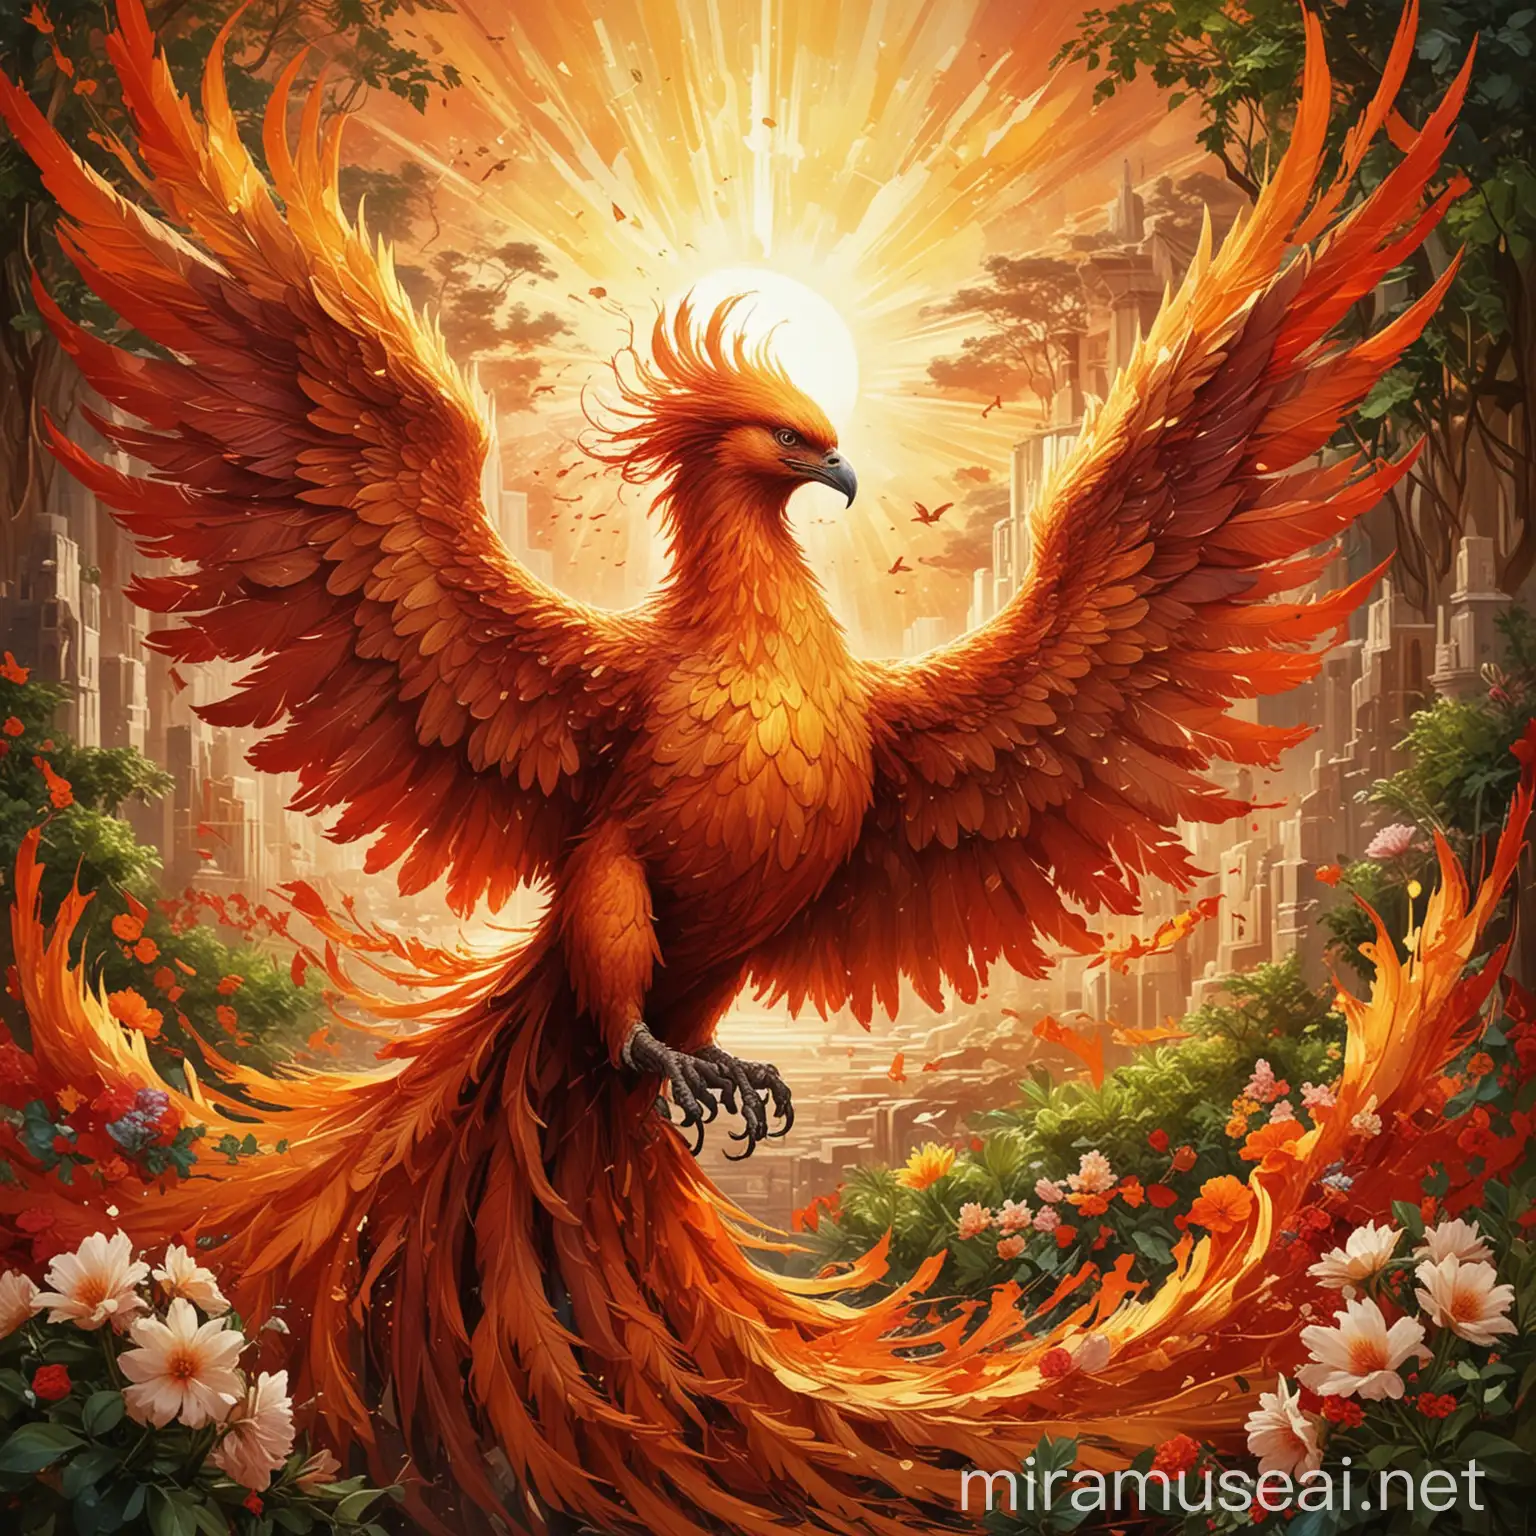 /imagine A majestic phoenix rising triumphantly from its ashes, symbolizing transformation and hope. The phoenix is depicted in vibrant warm colors such as red, orange, and gold, representing fire and energy. It is breaking free from shattered chains that symbolize addiction, with pieces of the chains falling away. Its feathers transition from dark, shadowy hues (symbolizing the darkness of addiction) to bright, radiant colors (symbolizing freedom and new life). In the background, a bright sun is rising, casting golden rays on the phoenix, symbolizing a new dawn and fresh beginnings. Around the phoenix, lush greenery and blooming flowers emerge, symbolizing growth and renewal. The image includes an inspirational text, "Rising from the ashes," in an elegant font. The artwork combines a highly detailed digital painting style with abstract elements, utilizing vibrant colors and shapes to enhance the message of hope and transformation. Emphasize light and shadow to create depth and highlight the phoenix's triumph. --v 5 --ar 16:9 --q 2 --style digital painting --style abstract --light and shadow --hopeful --transformative --motivational